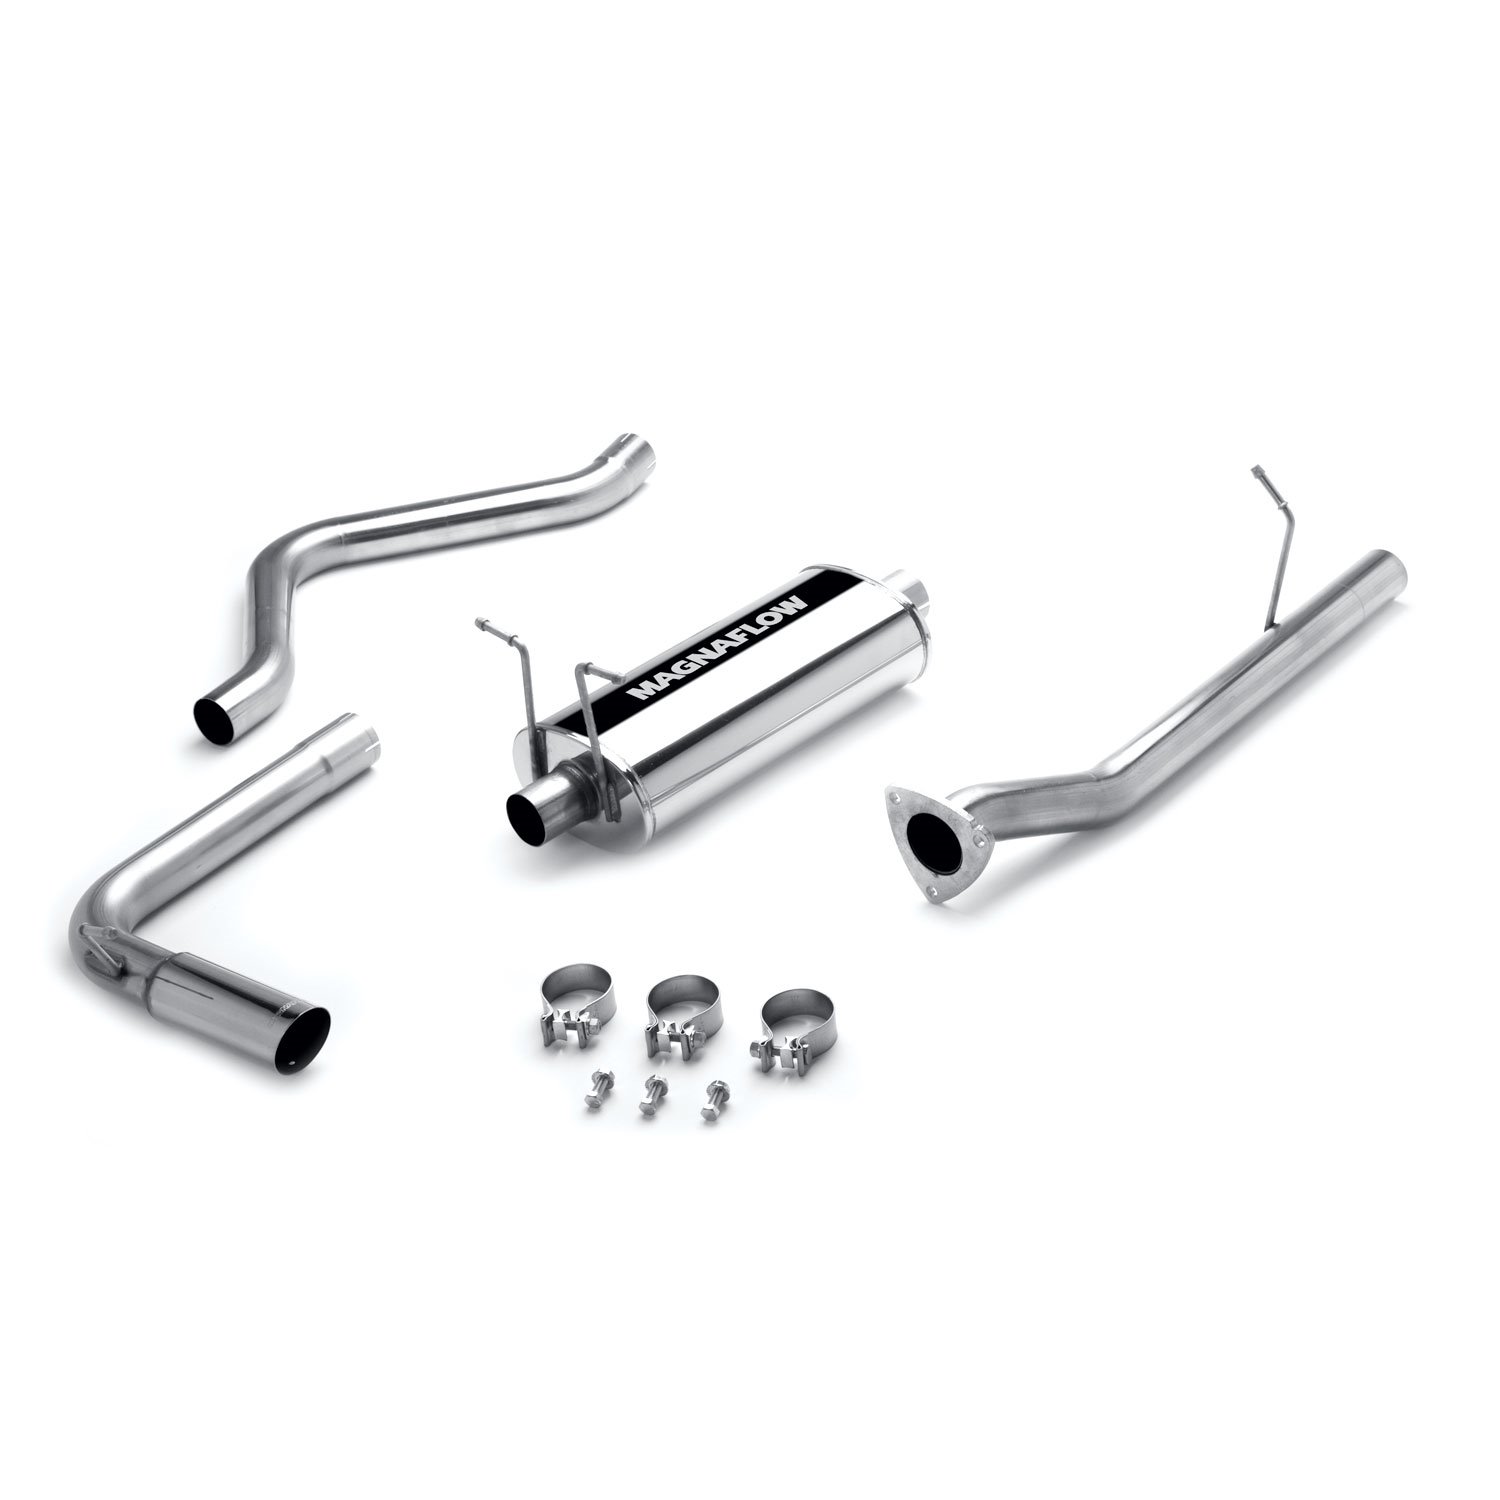 MF Series Cat-Back Exhaust System 1998-99 S10/Sonoma 2WD 4.3L (Ext Cab, 73.1")